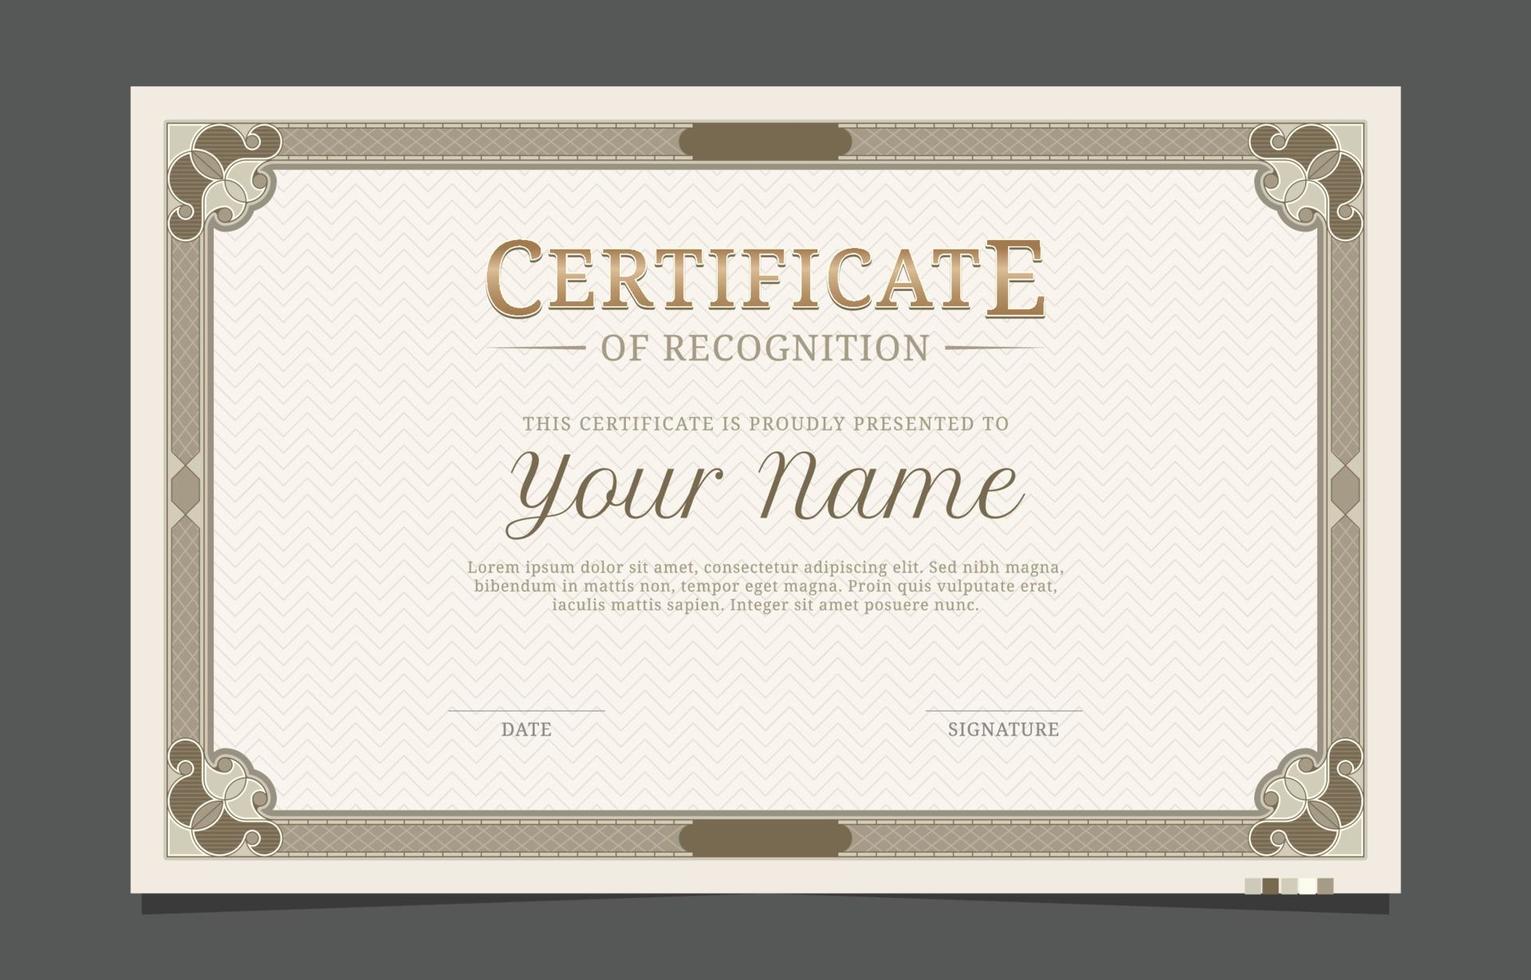 Certificate Of Recognition With Classic Style Background vector